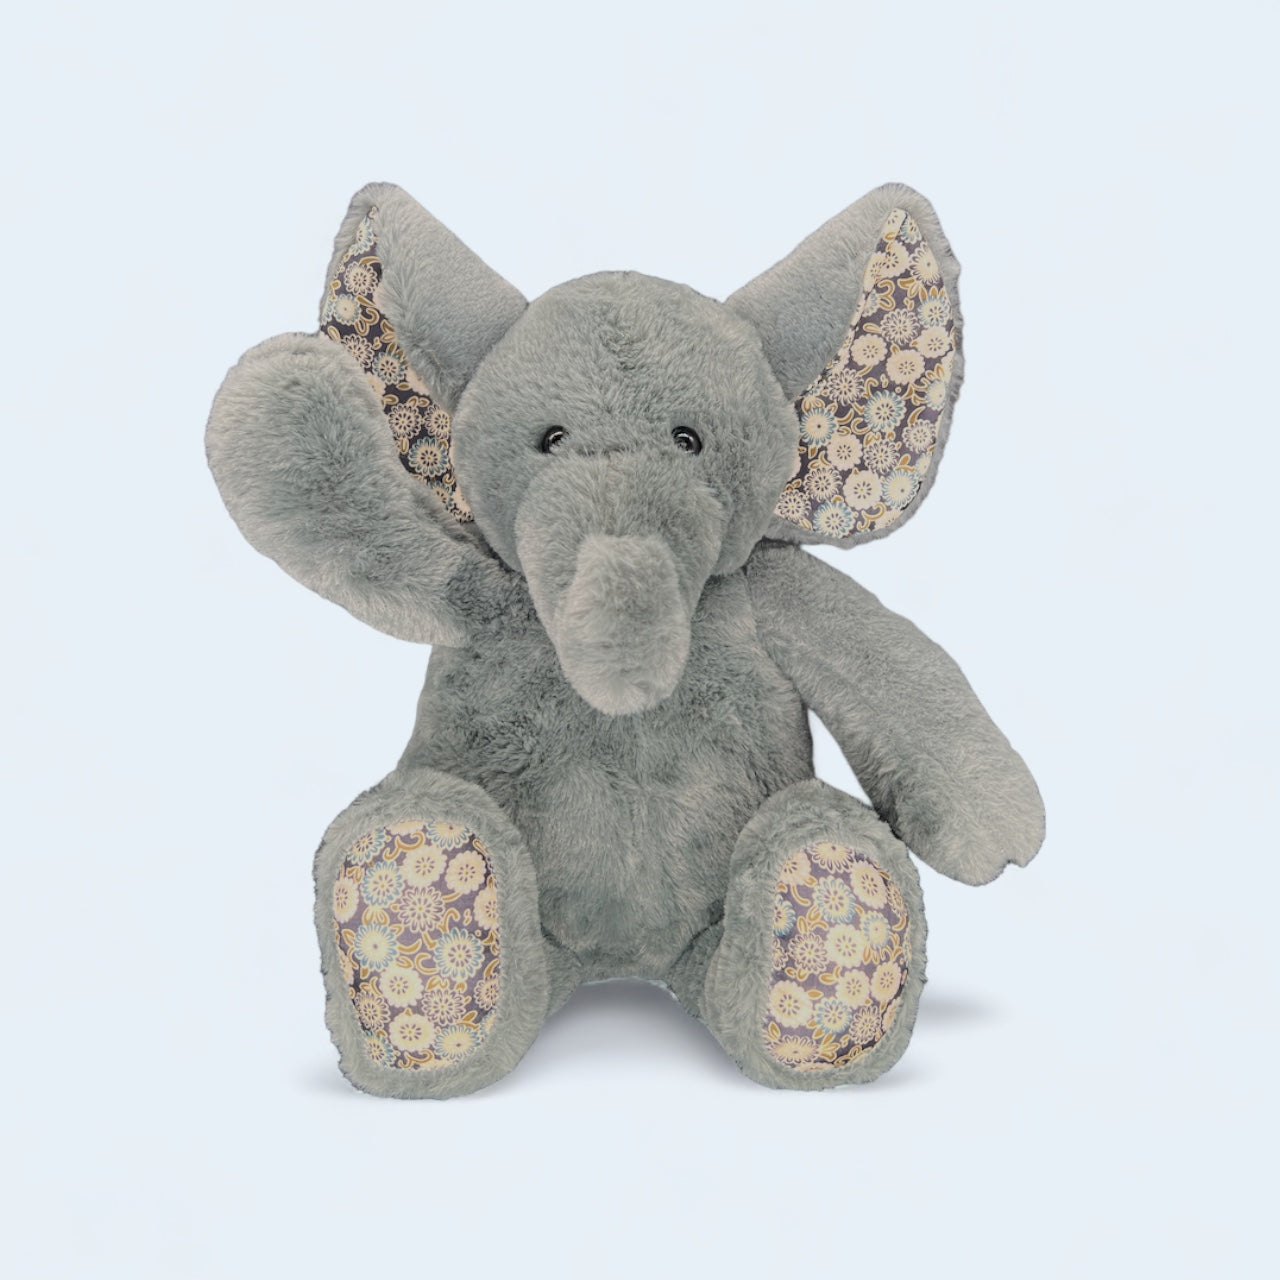 Forget-me-not Elephant